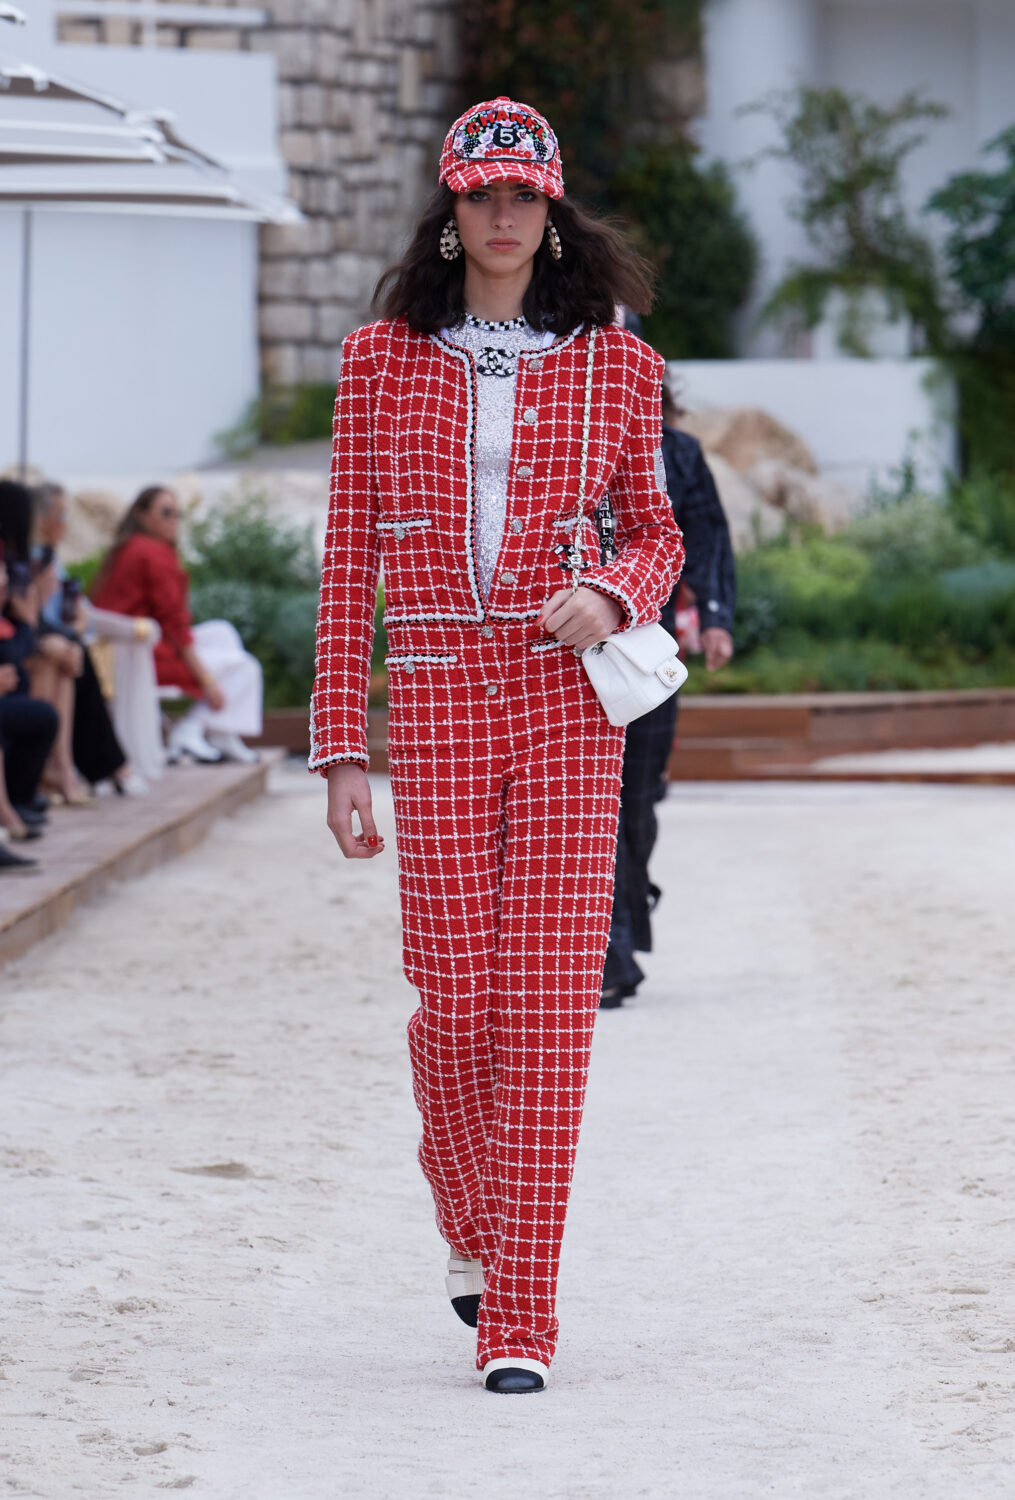 Chanel Cruise Comes To St Tropez